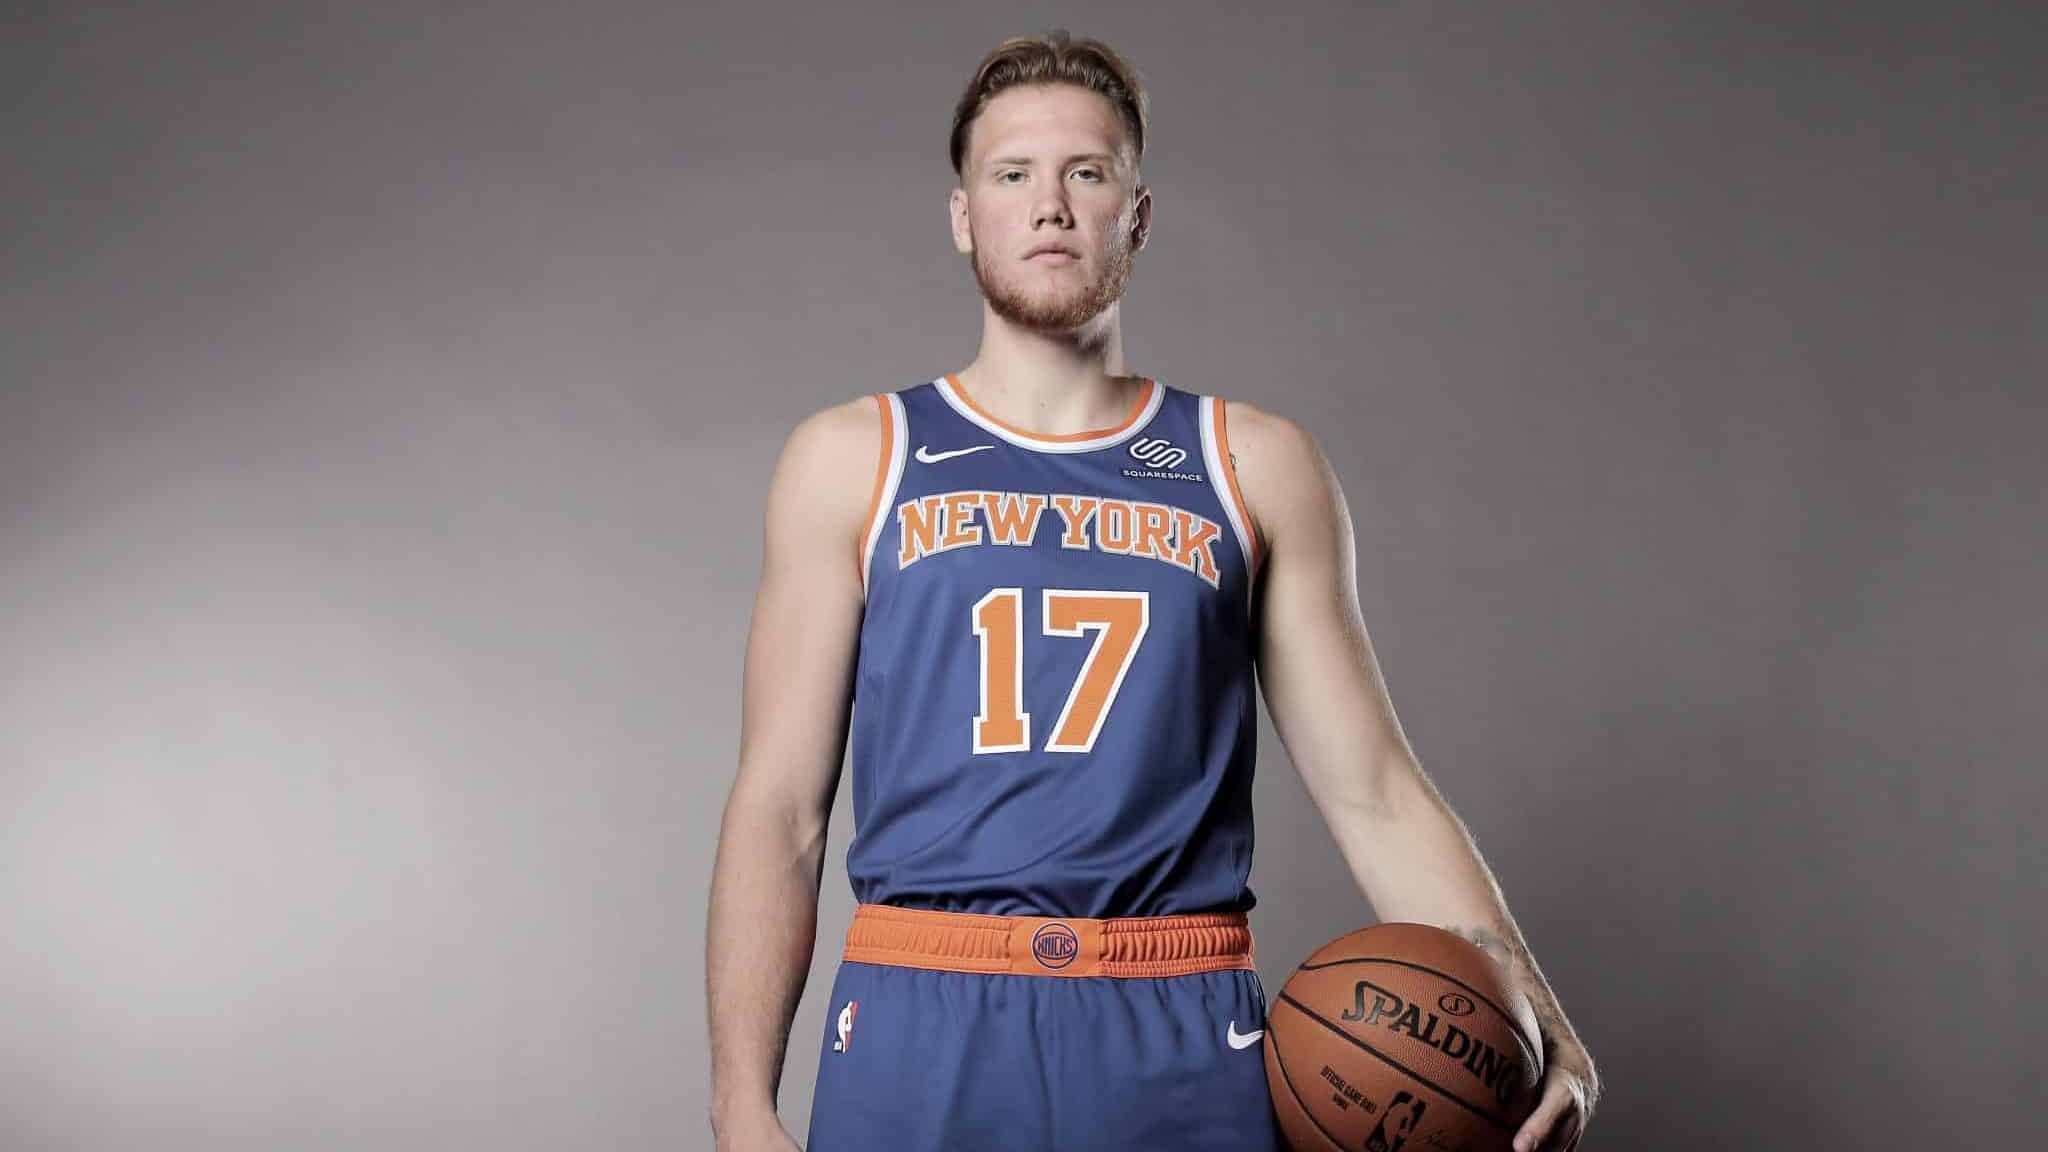 MADISON, NEW JERSEY - AUGUST 11: (EDITOR'S NOTE: SATURATIOIN WAS REMOVED FROM THIS IMAGE) Ignas Brazdeikis of the New York Knicks poses for a portrait during the 2019 NBA Rookie Photo Shoot on August 11, 2019 at the Ferguson Recreation Center in Madison, New Jersey.